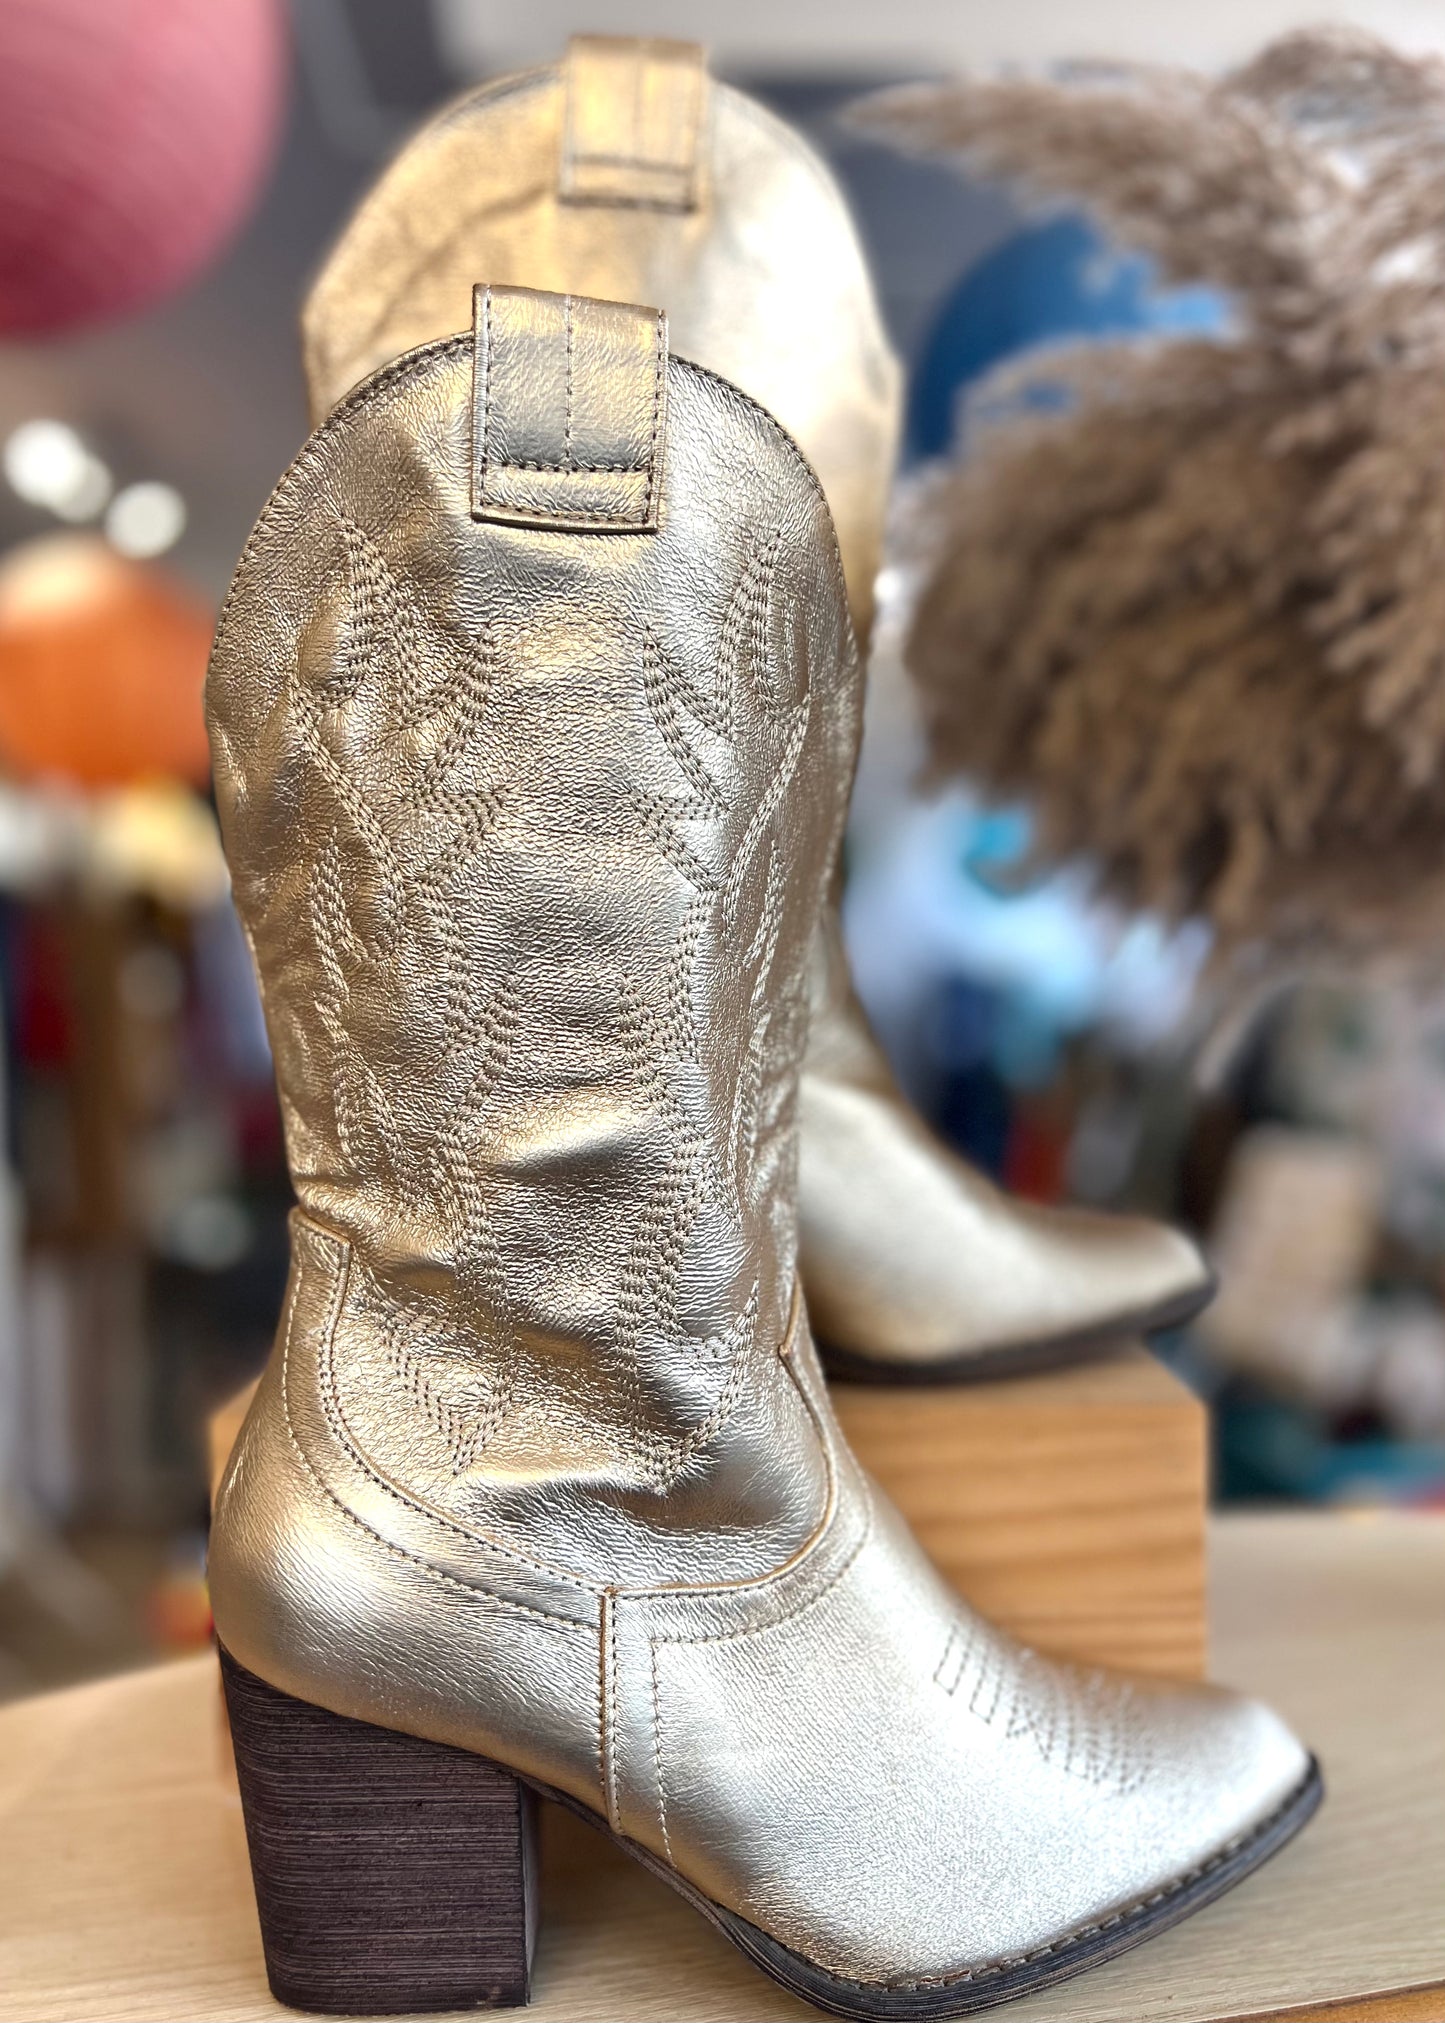 Taylor Metallic Gold Embroidered Western Cowboy Boots